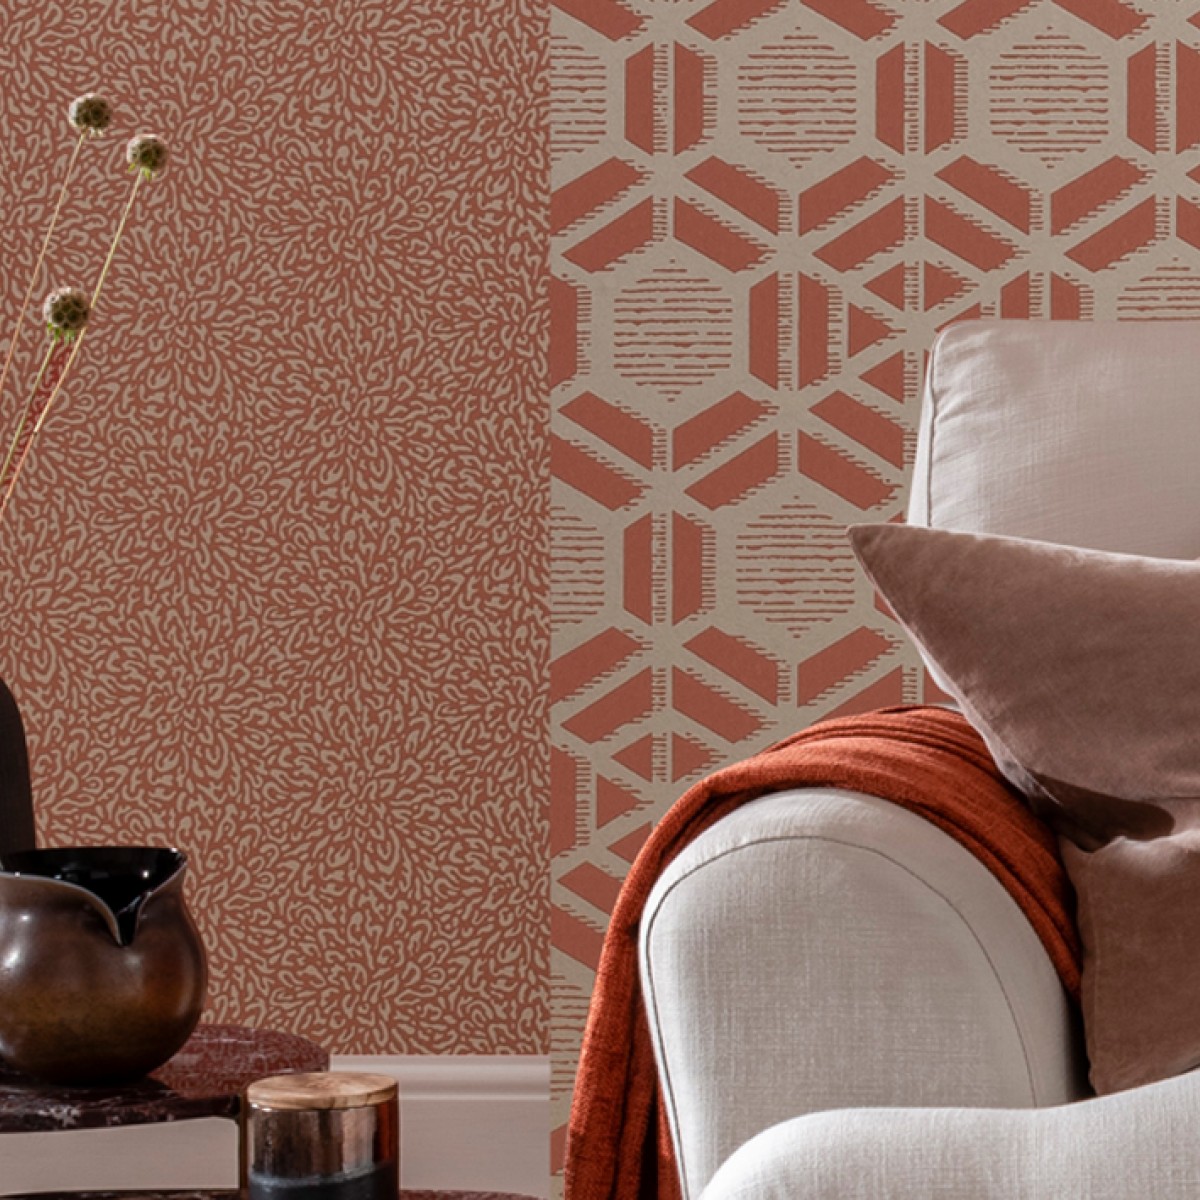 Tapet Corallo, Red Clay Luxury Patterned, 1838 Wallcoverings, 5.3mp / rola, Tapet living 